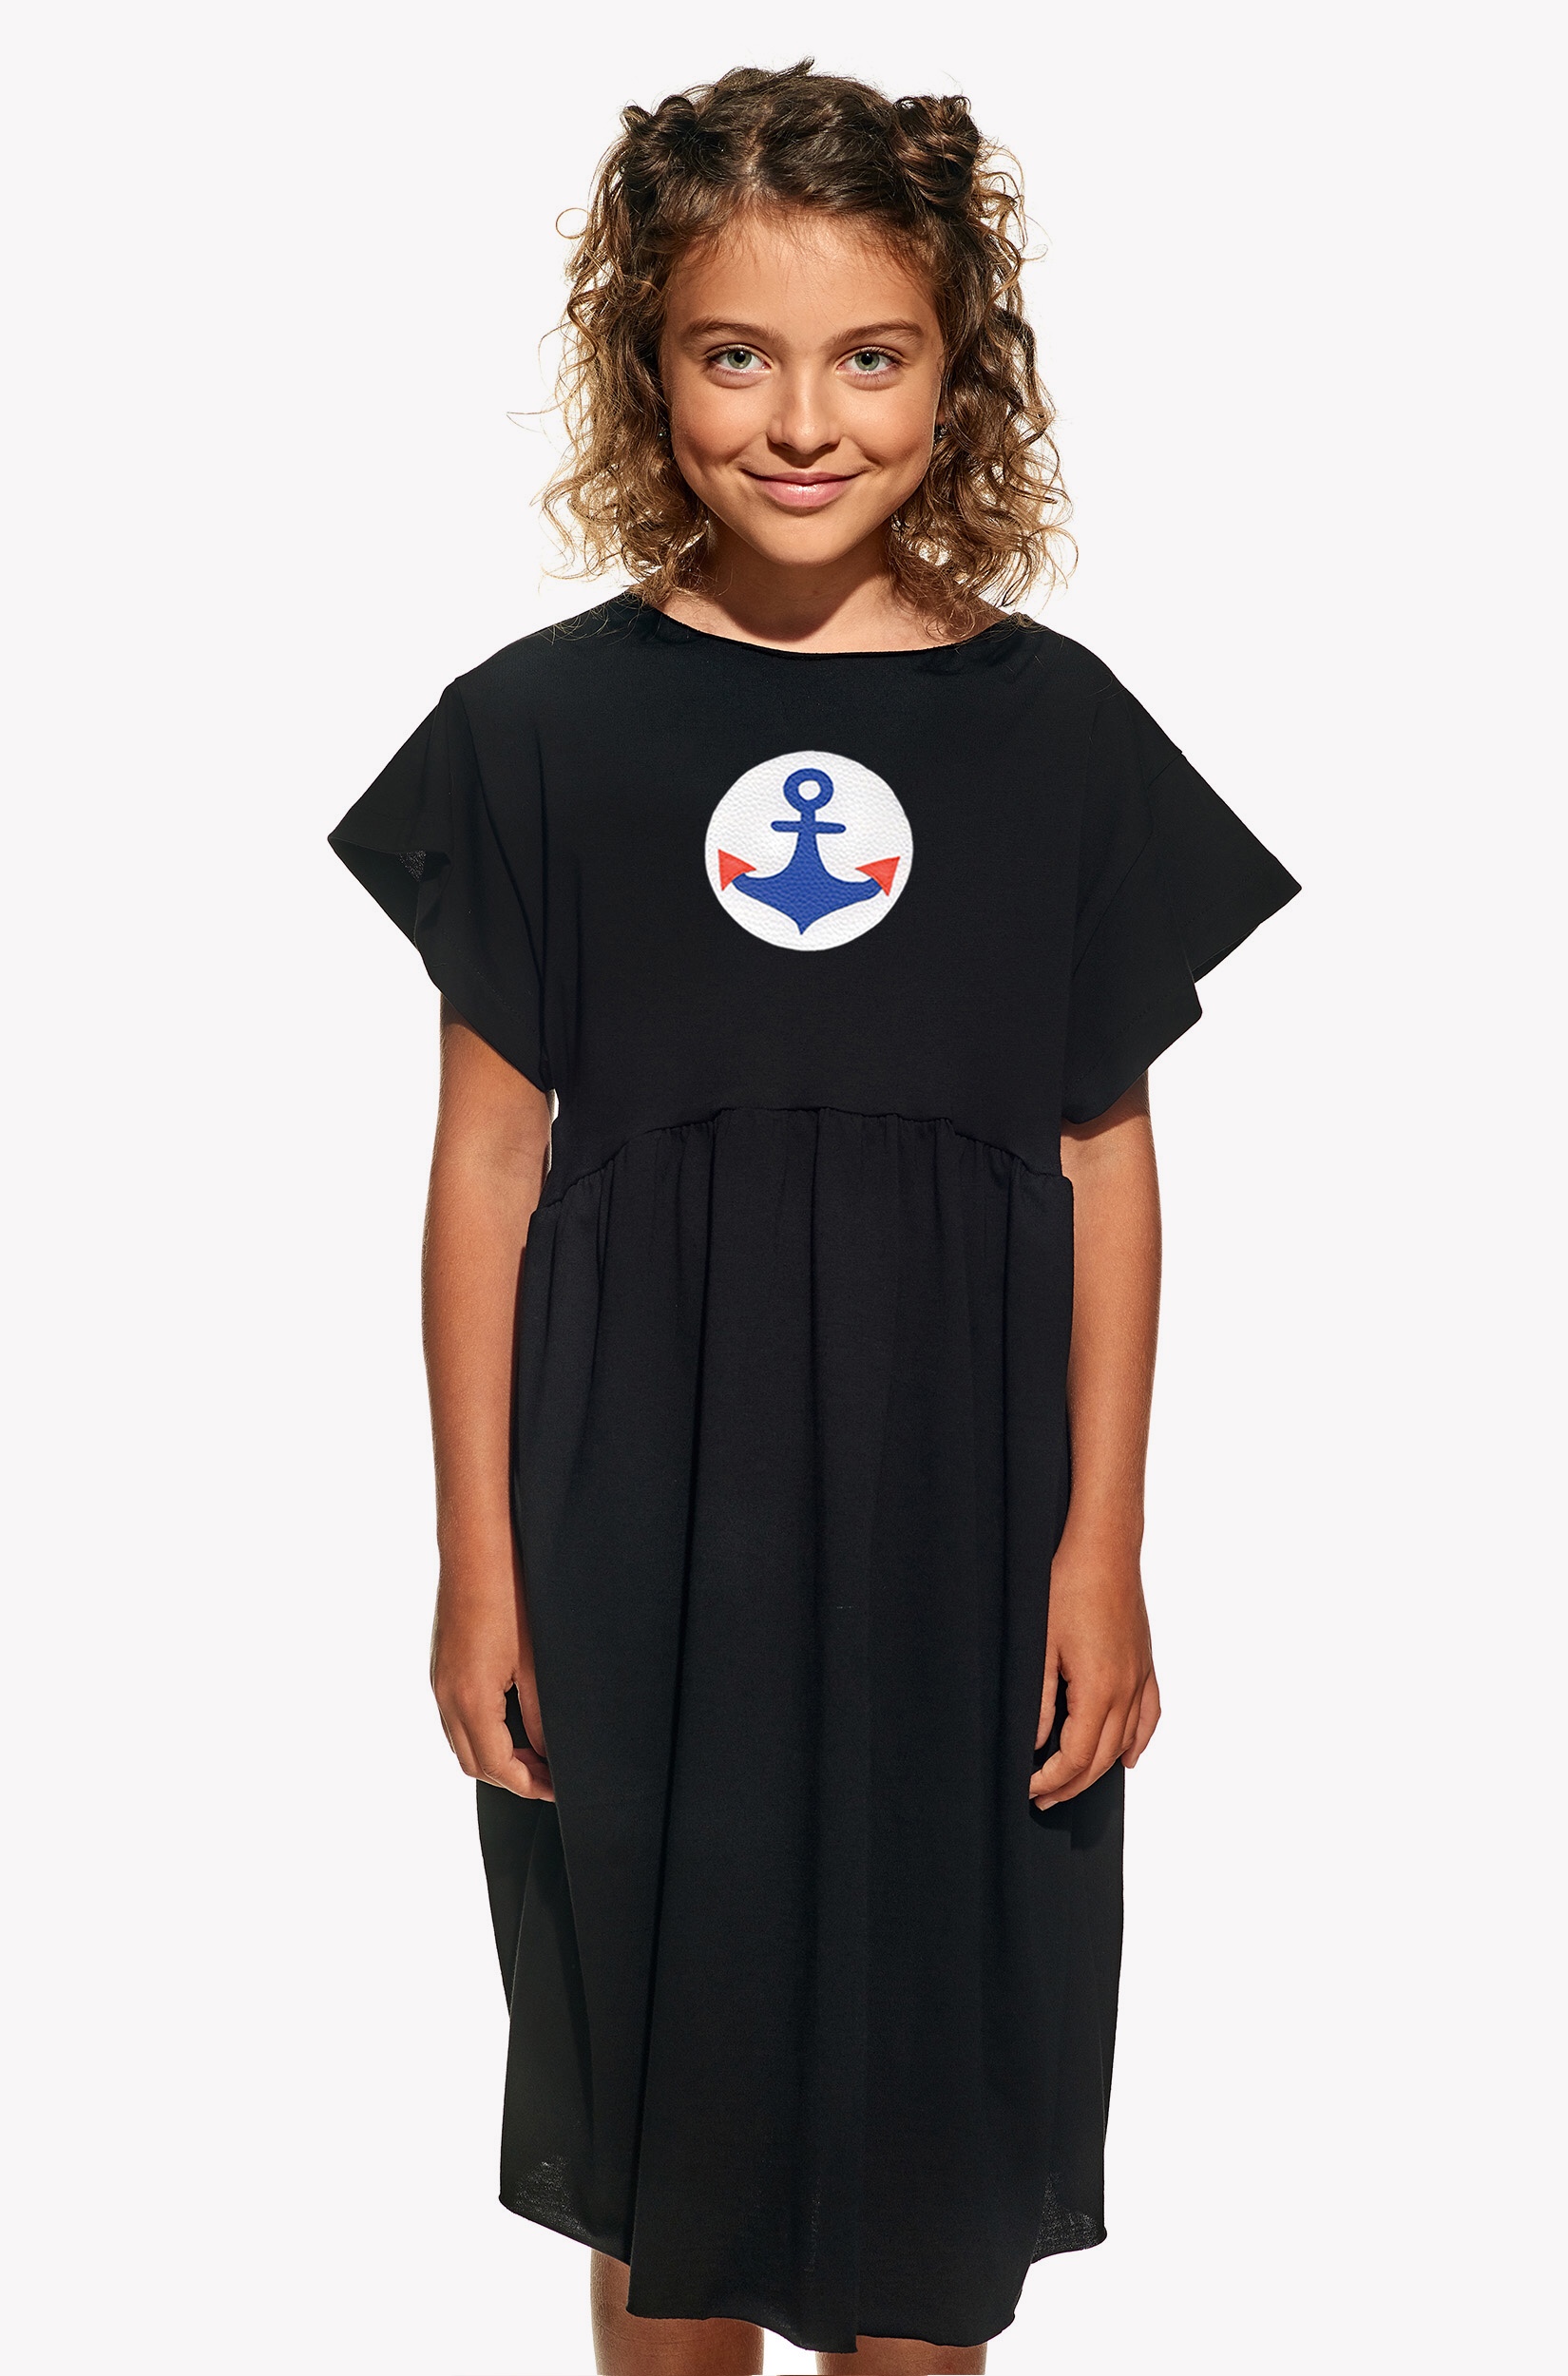 Dresses with anchor